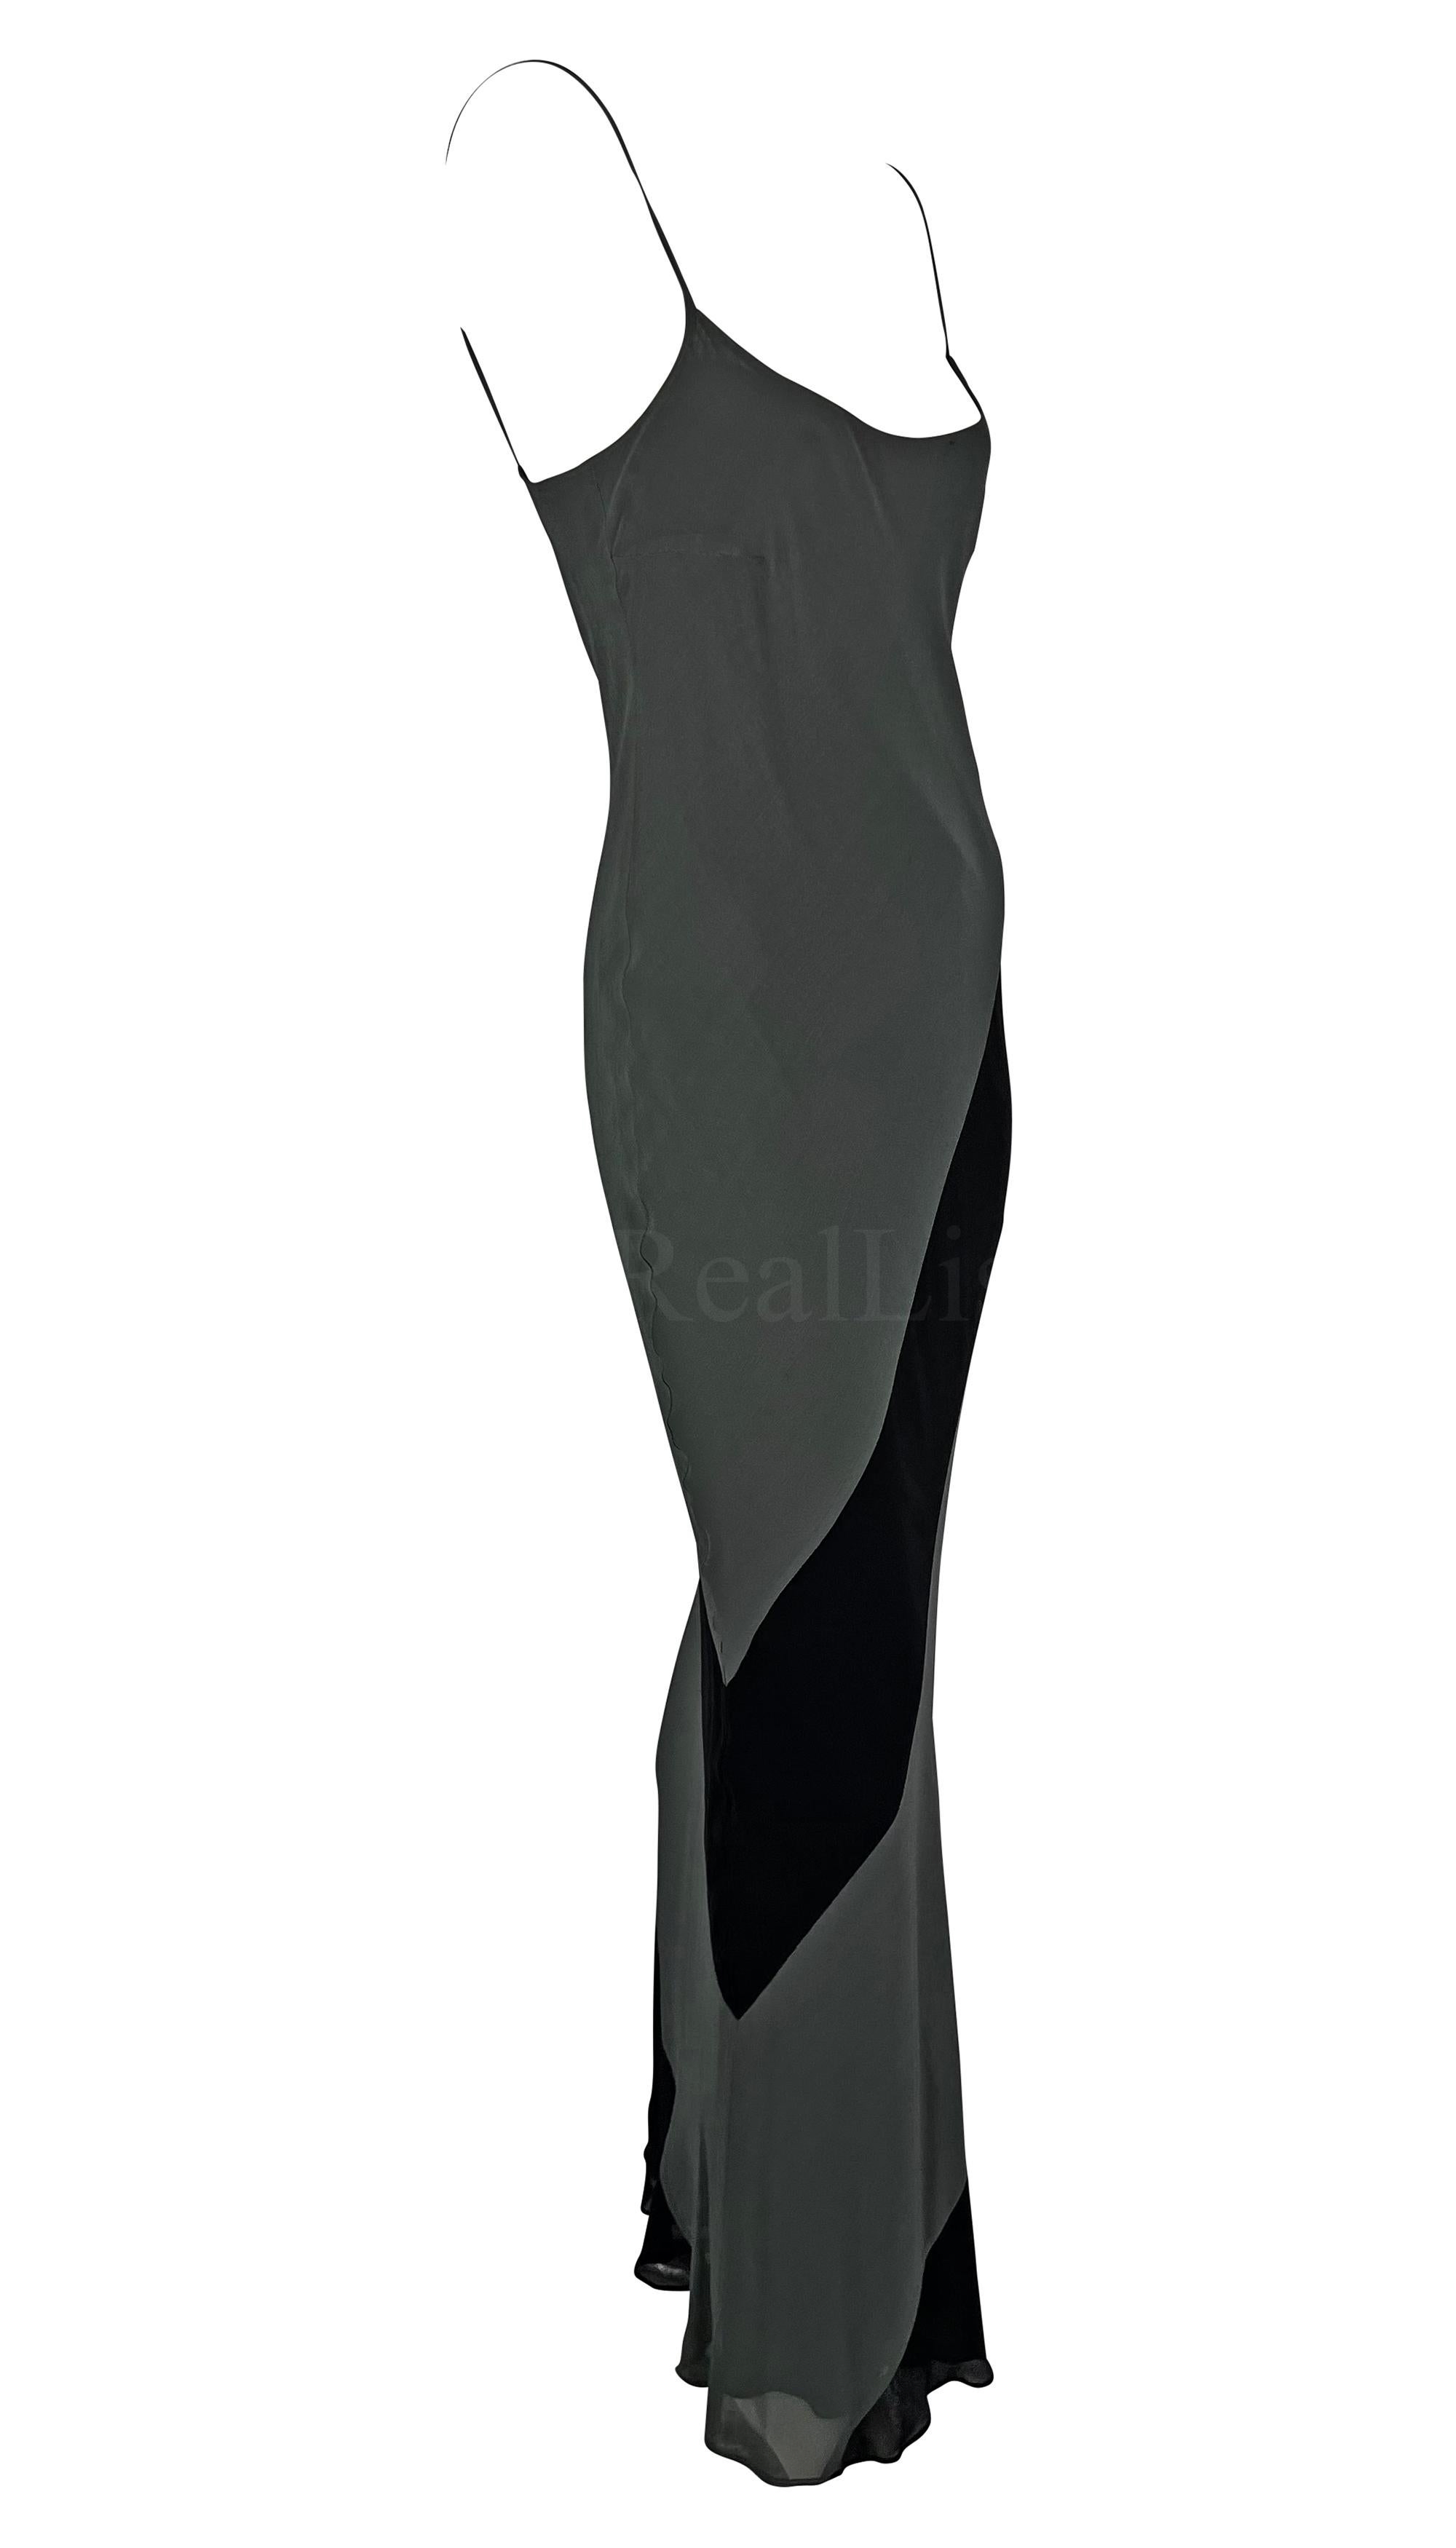 S/S 1997 Gucci by Tom Ford Grey Black Panel Slip Dress Gown For Sale 5